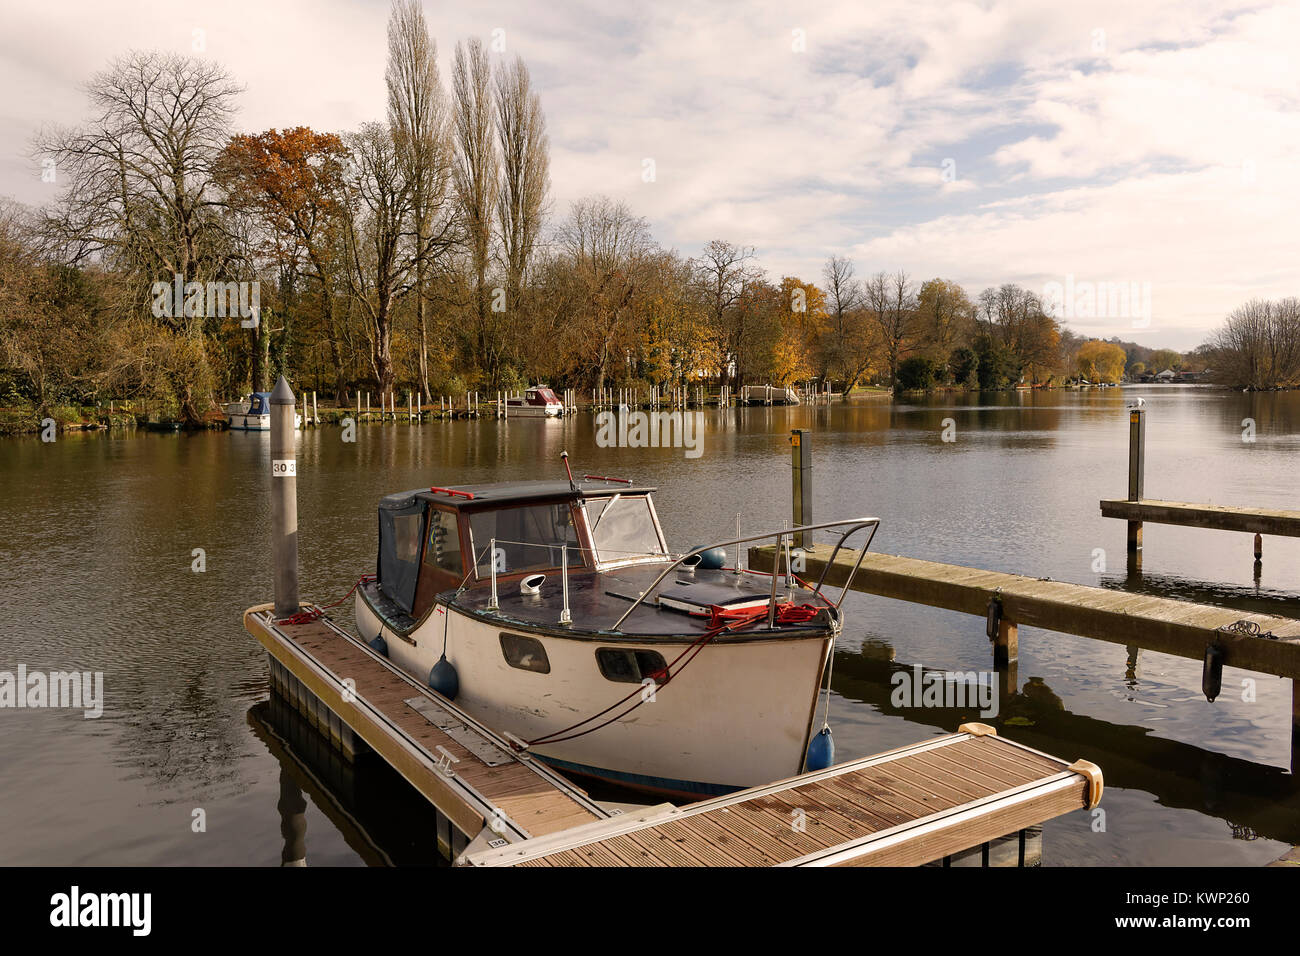 An image of a boat moored on the banks of the River at Henley on Thames, Oxfordshire, England, UK Stock Photo